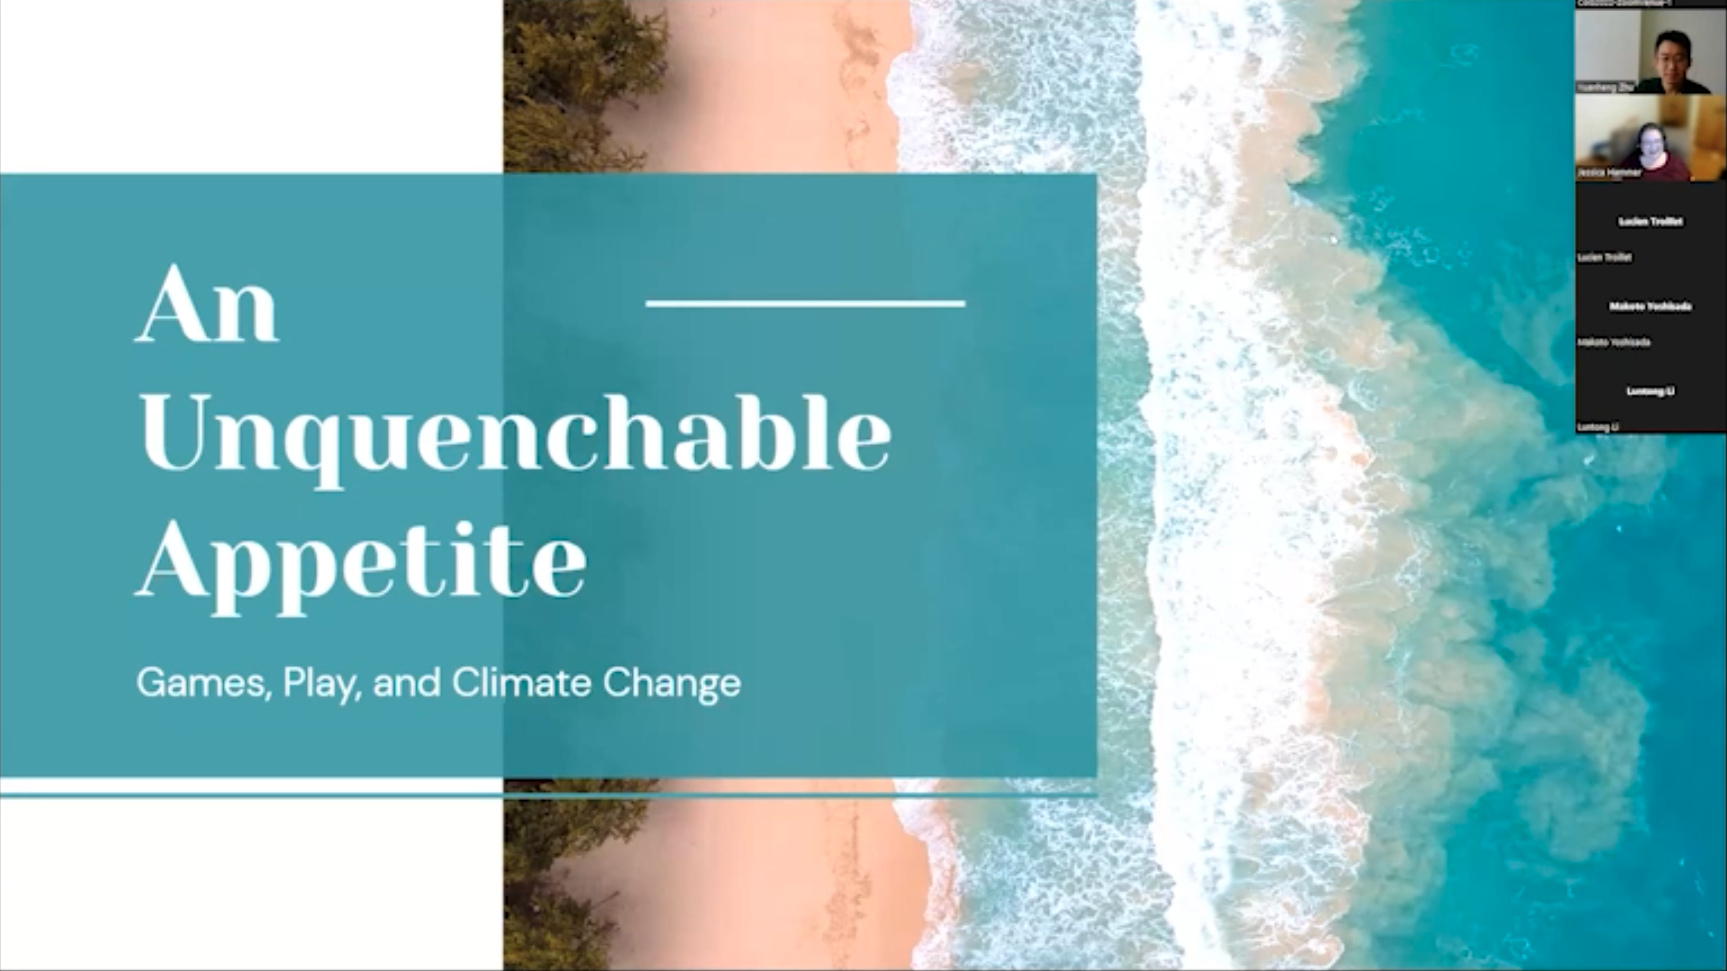 An Unquenchable Appetite:  Games, Play, and Climate Change - IEEE CoG2022 Keynote V